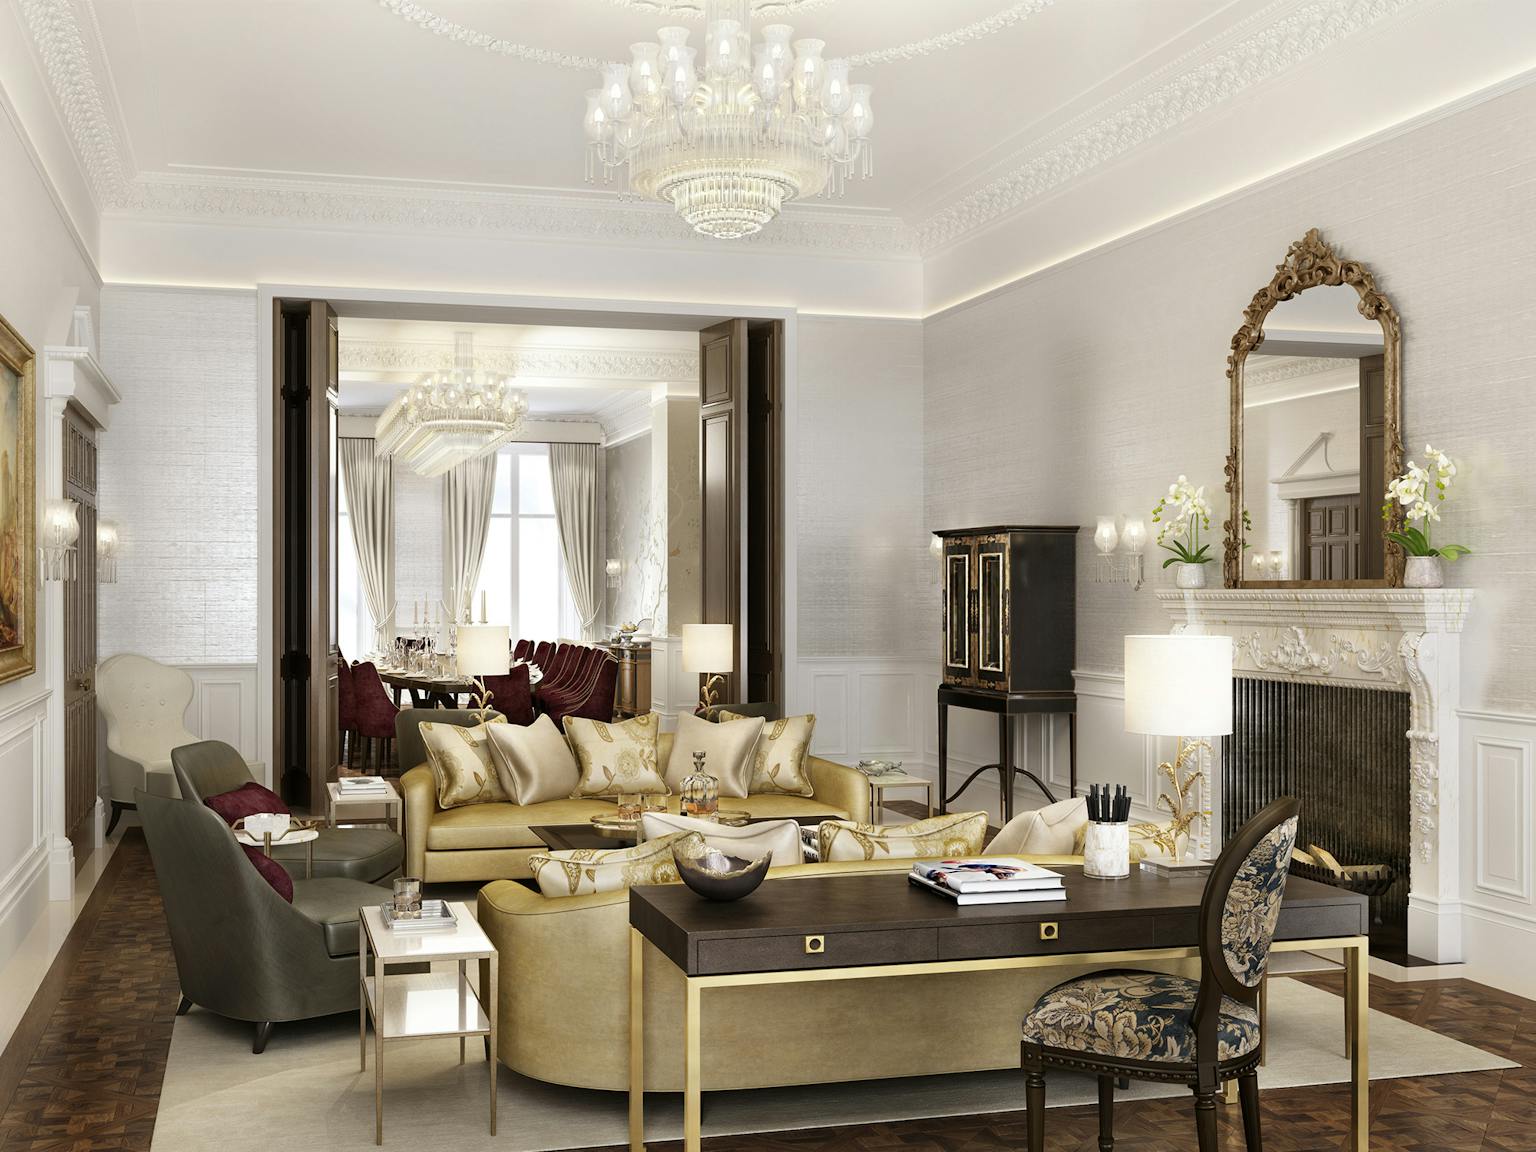 The voluminous spaces at ground and first floor levels now provide appropriately scaled reception rooms, in keeping with a house of this size and grandeur.